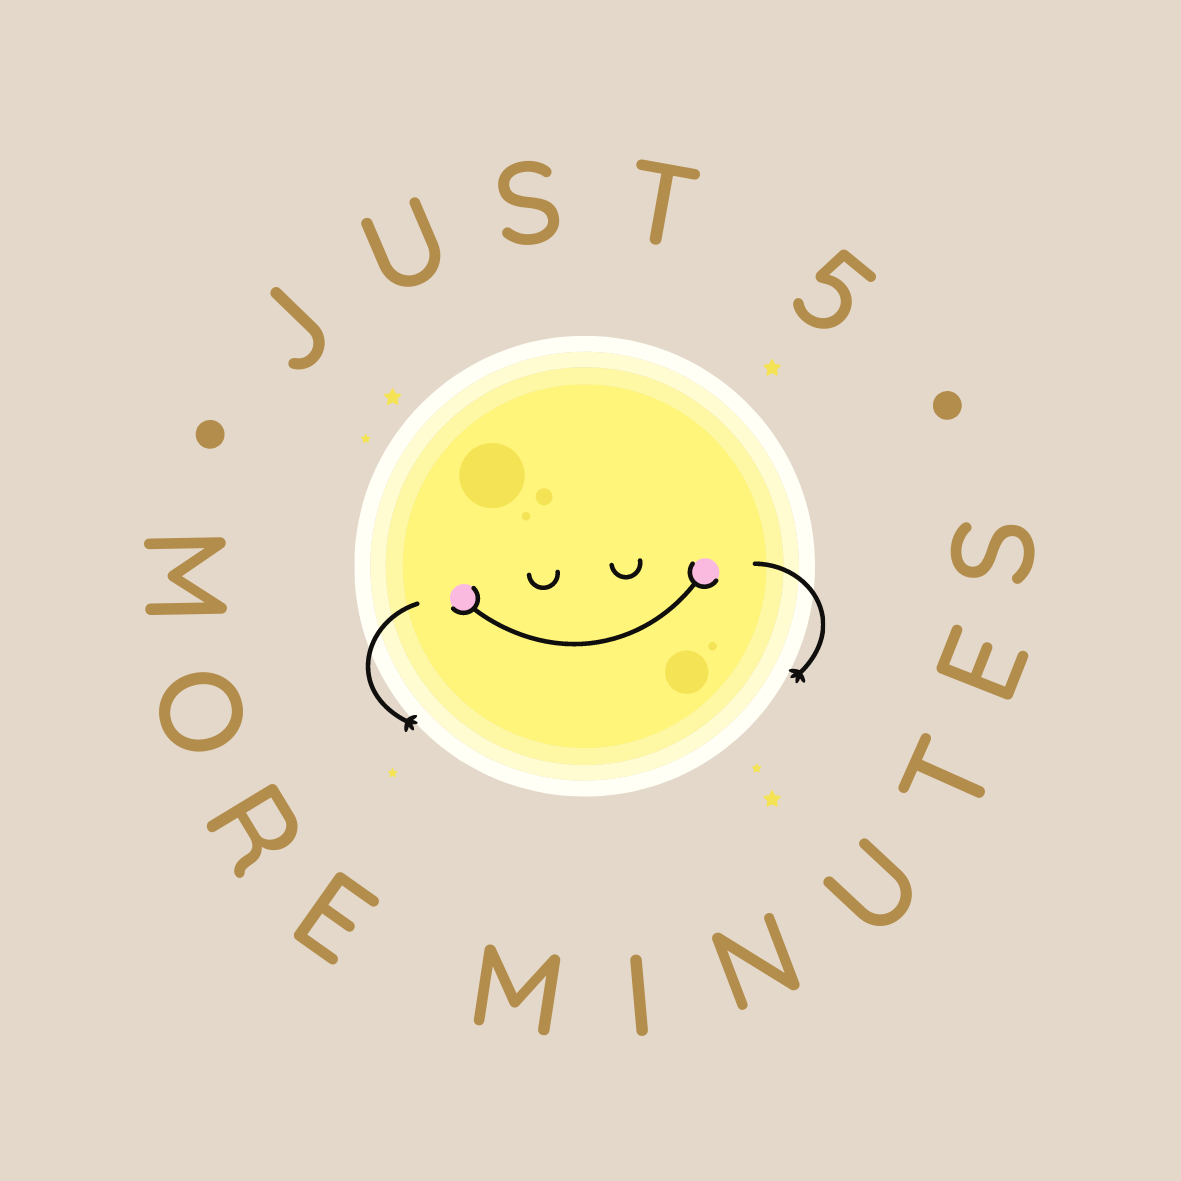 Just 5 more Minutes sticker